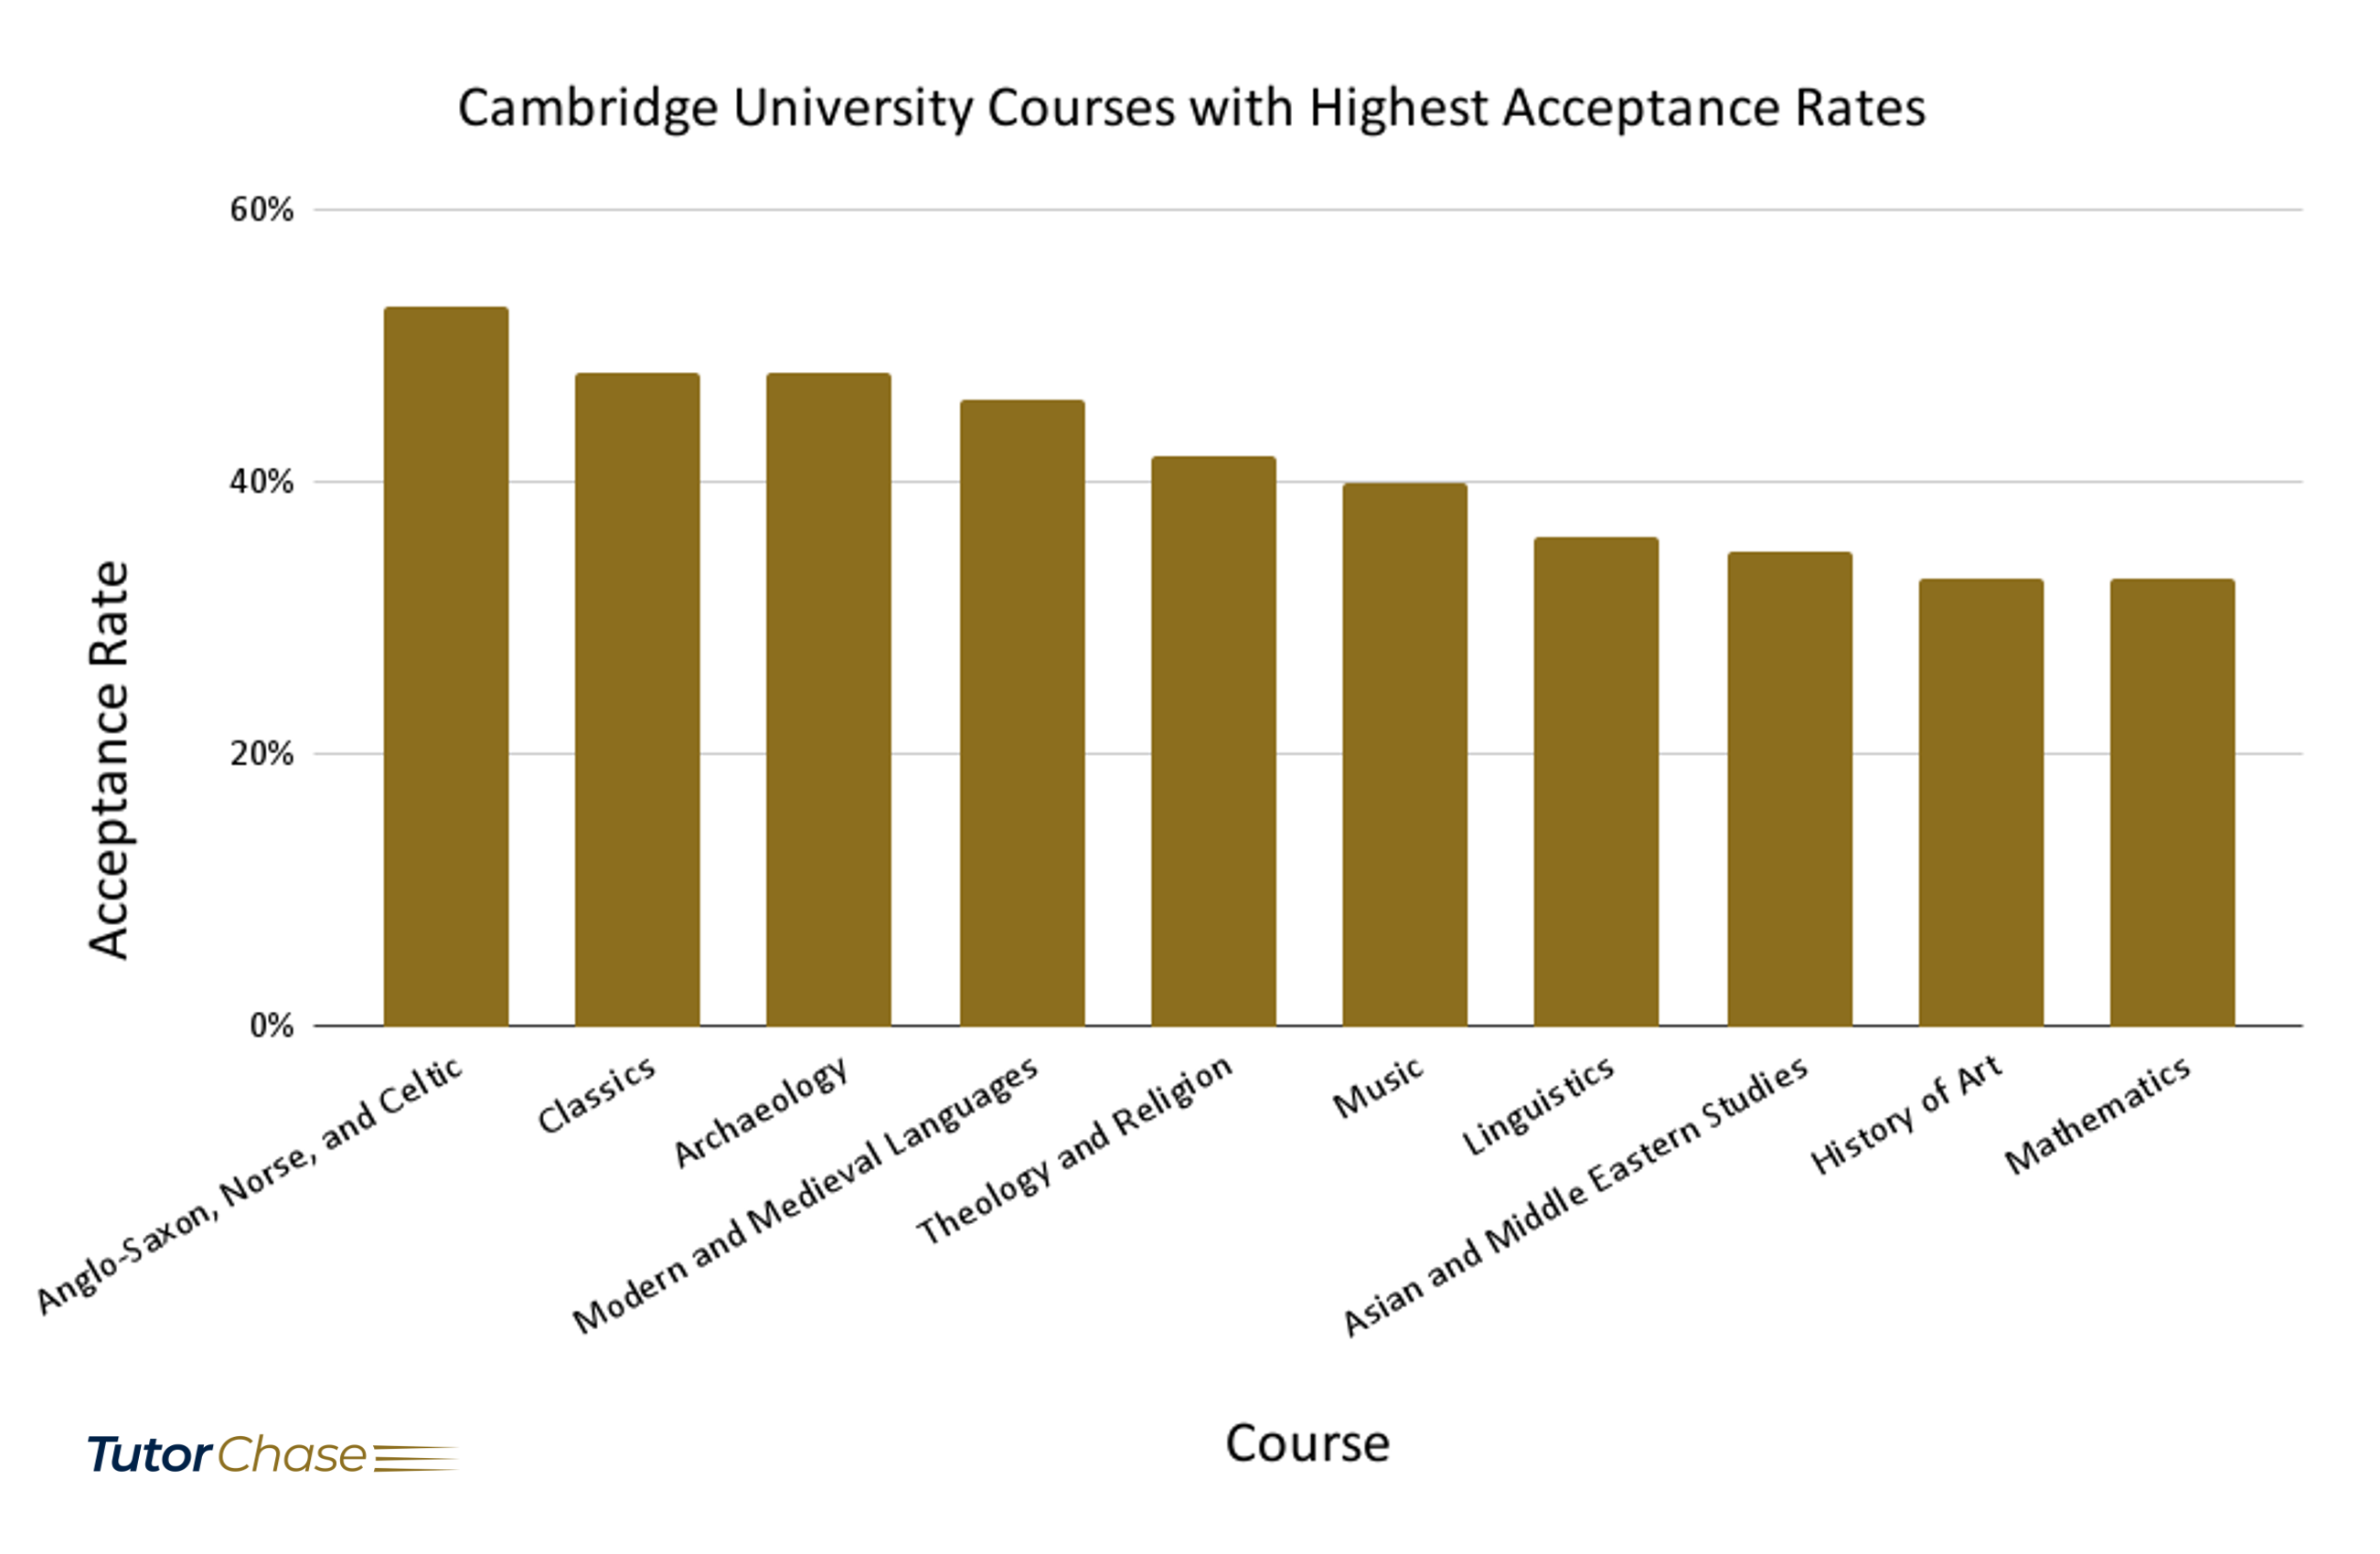 Cambridge University Courses with the Highest Acceptance Rates